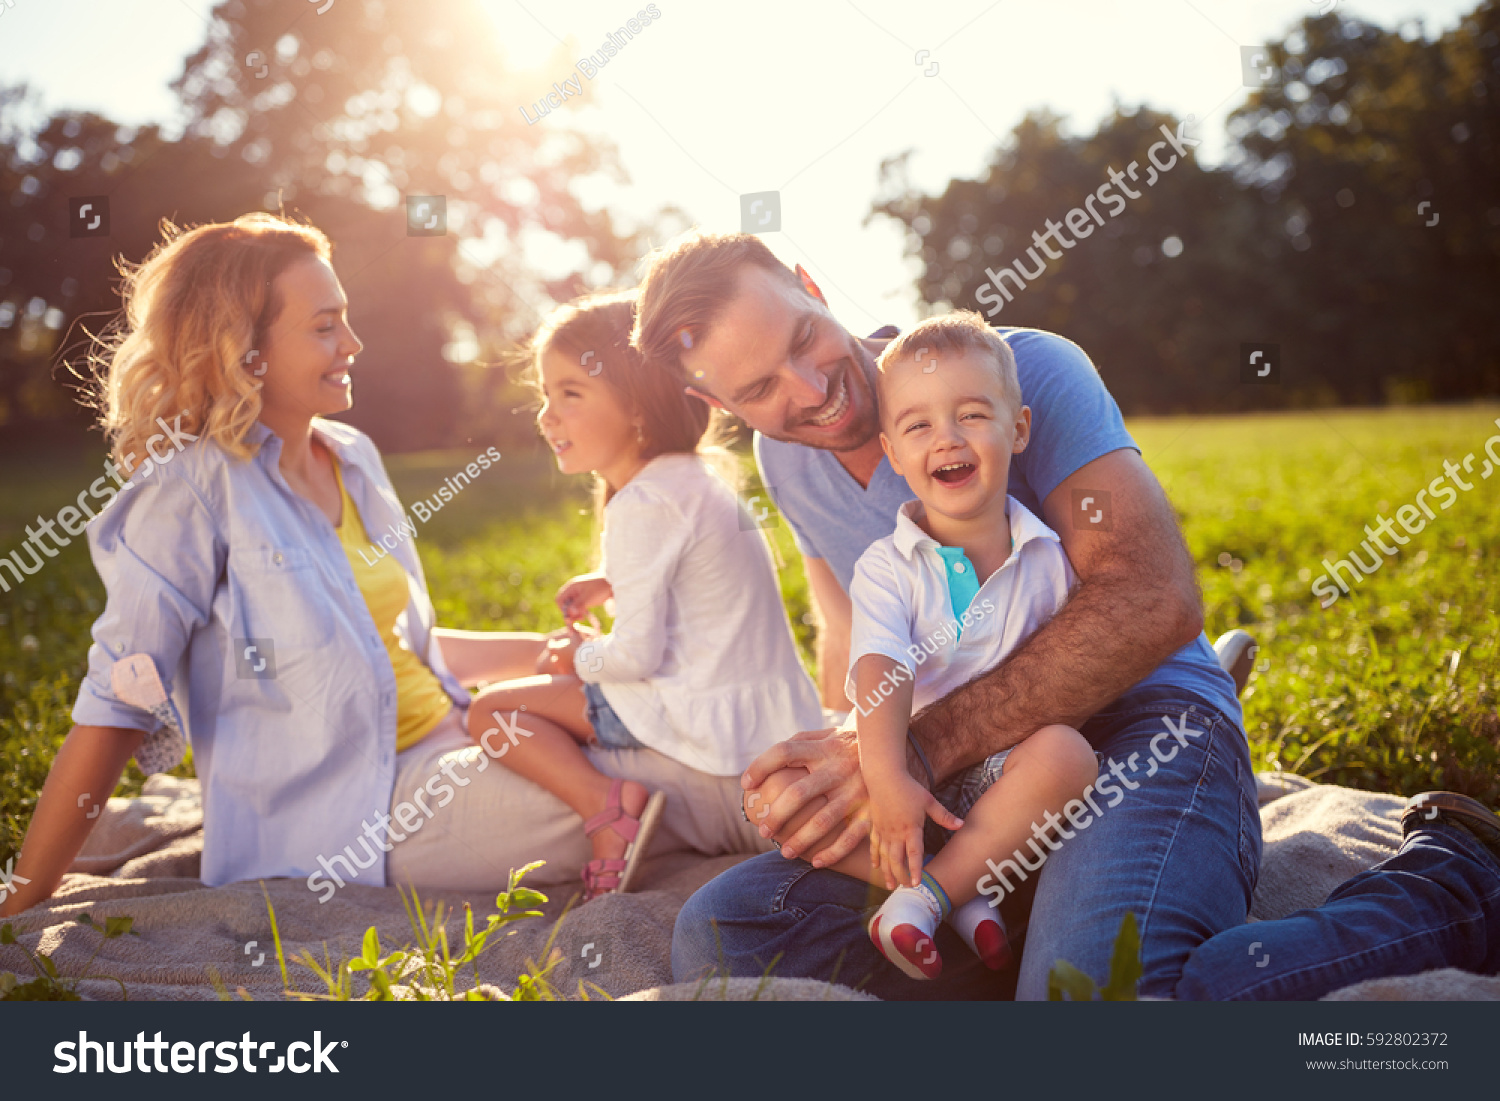 Young family with children having fun in nature  #592802372